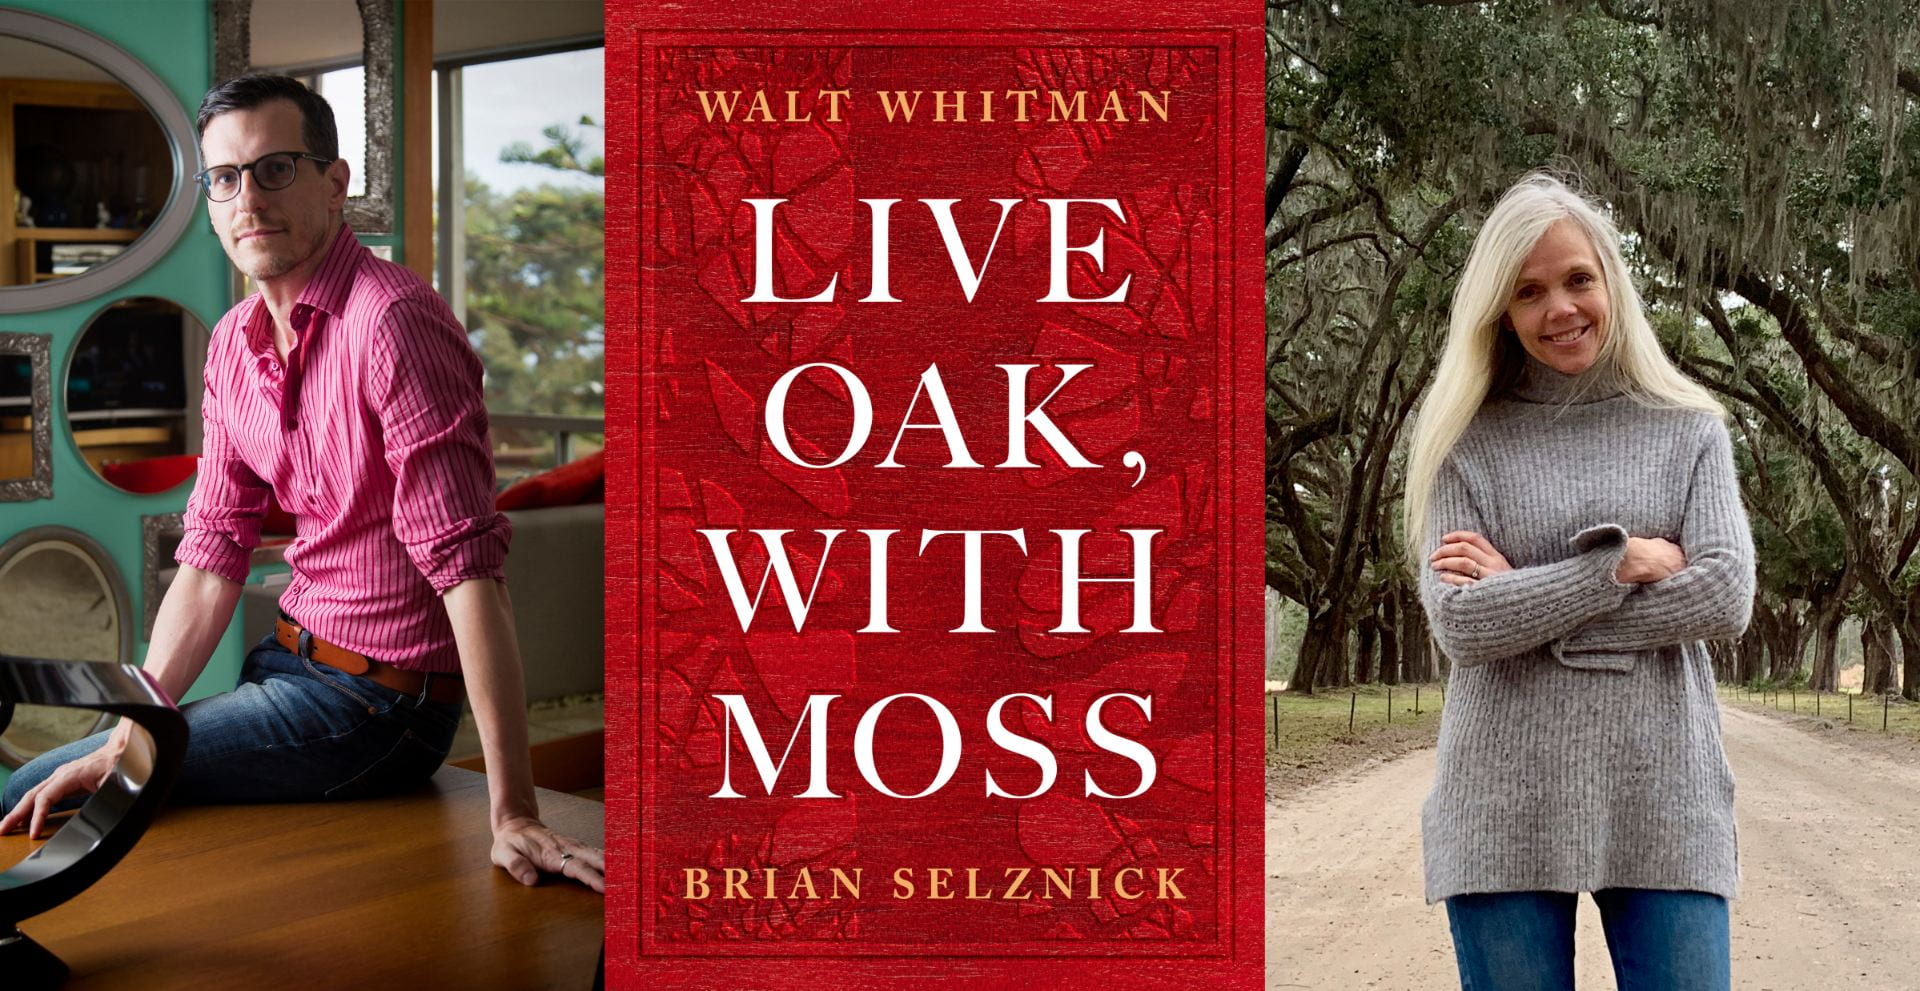 Illustrator Brian Selznick (left) and world-renowned Walt Whitman scholar Karen Karbeinar (right) will present a lecture and live performance on Live Oak, With Moss (center).